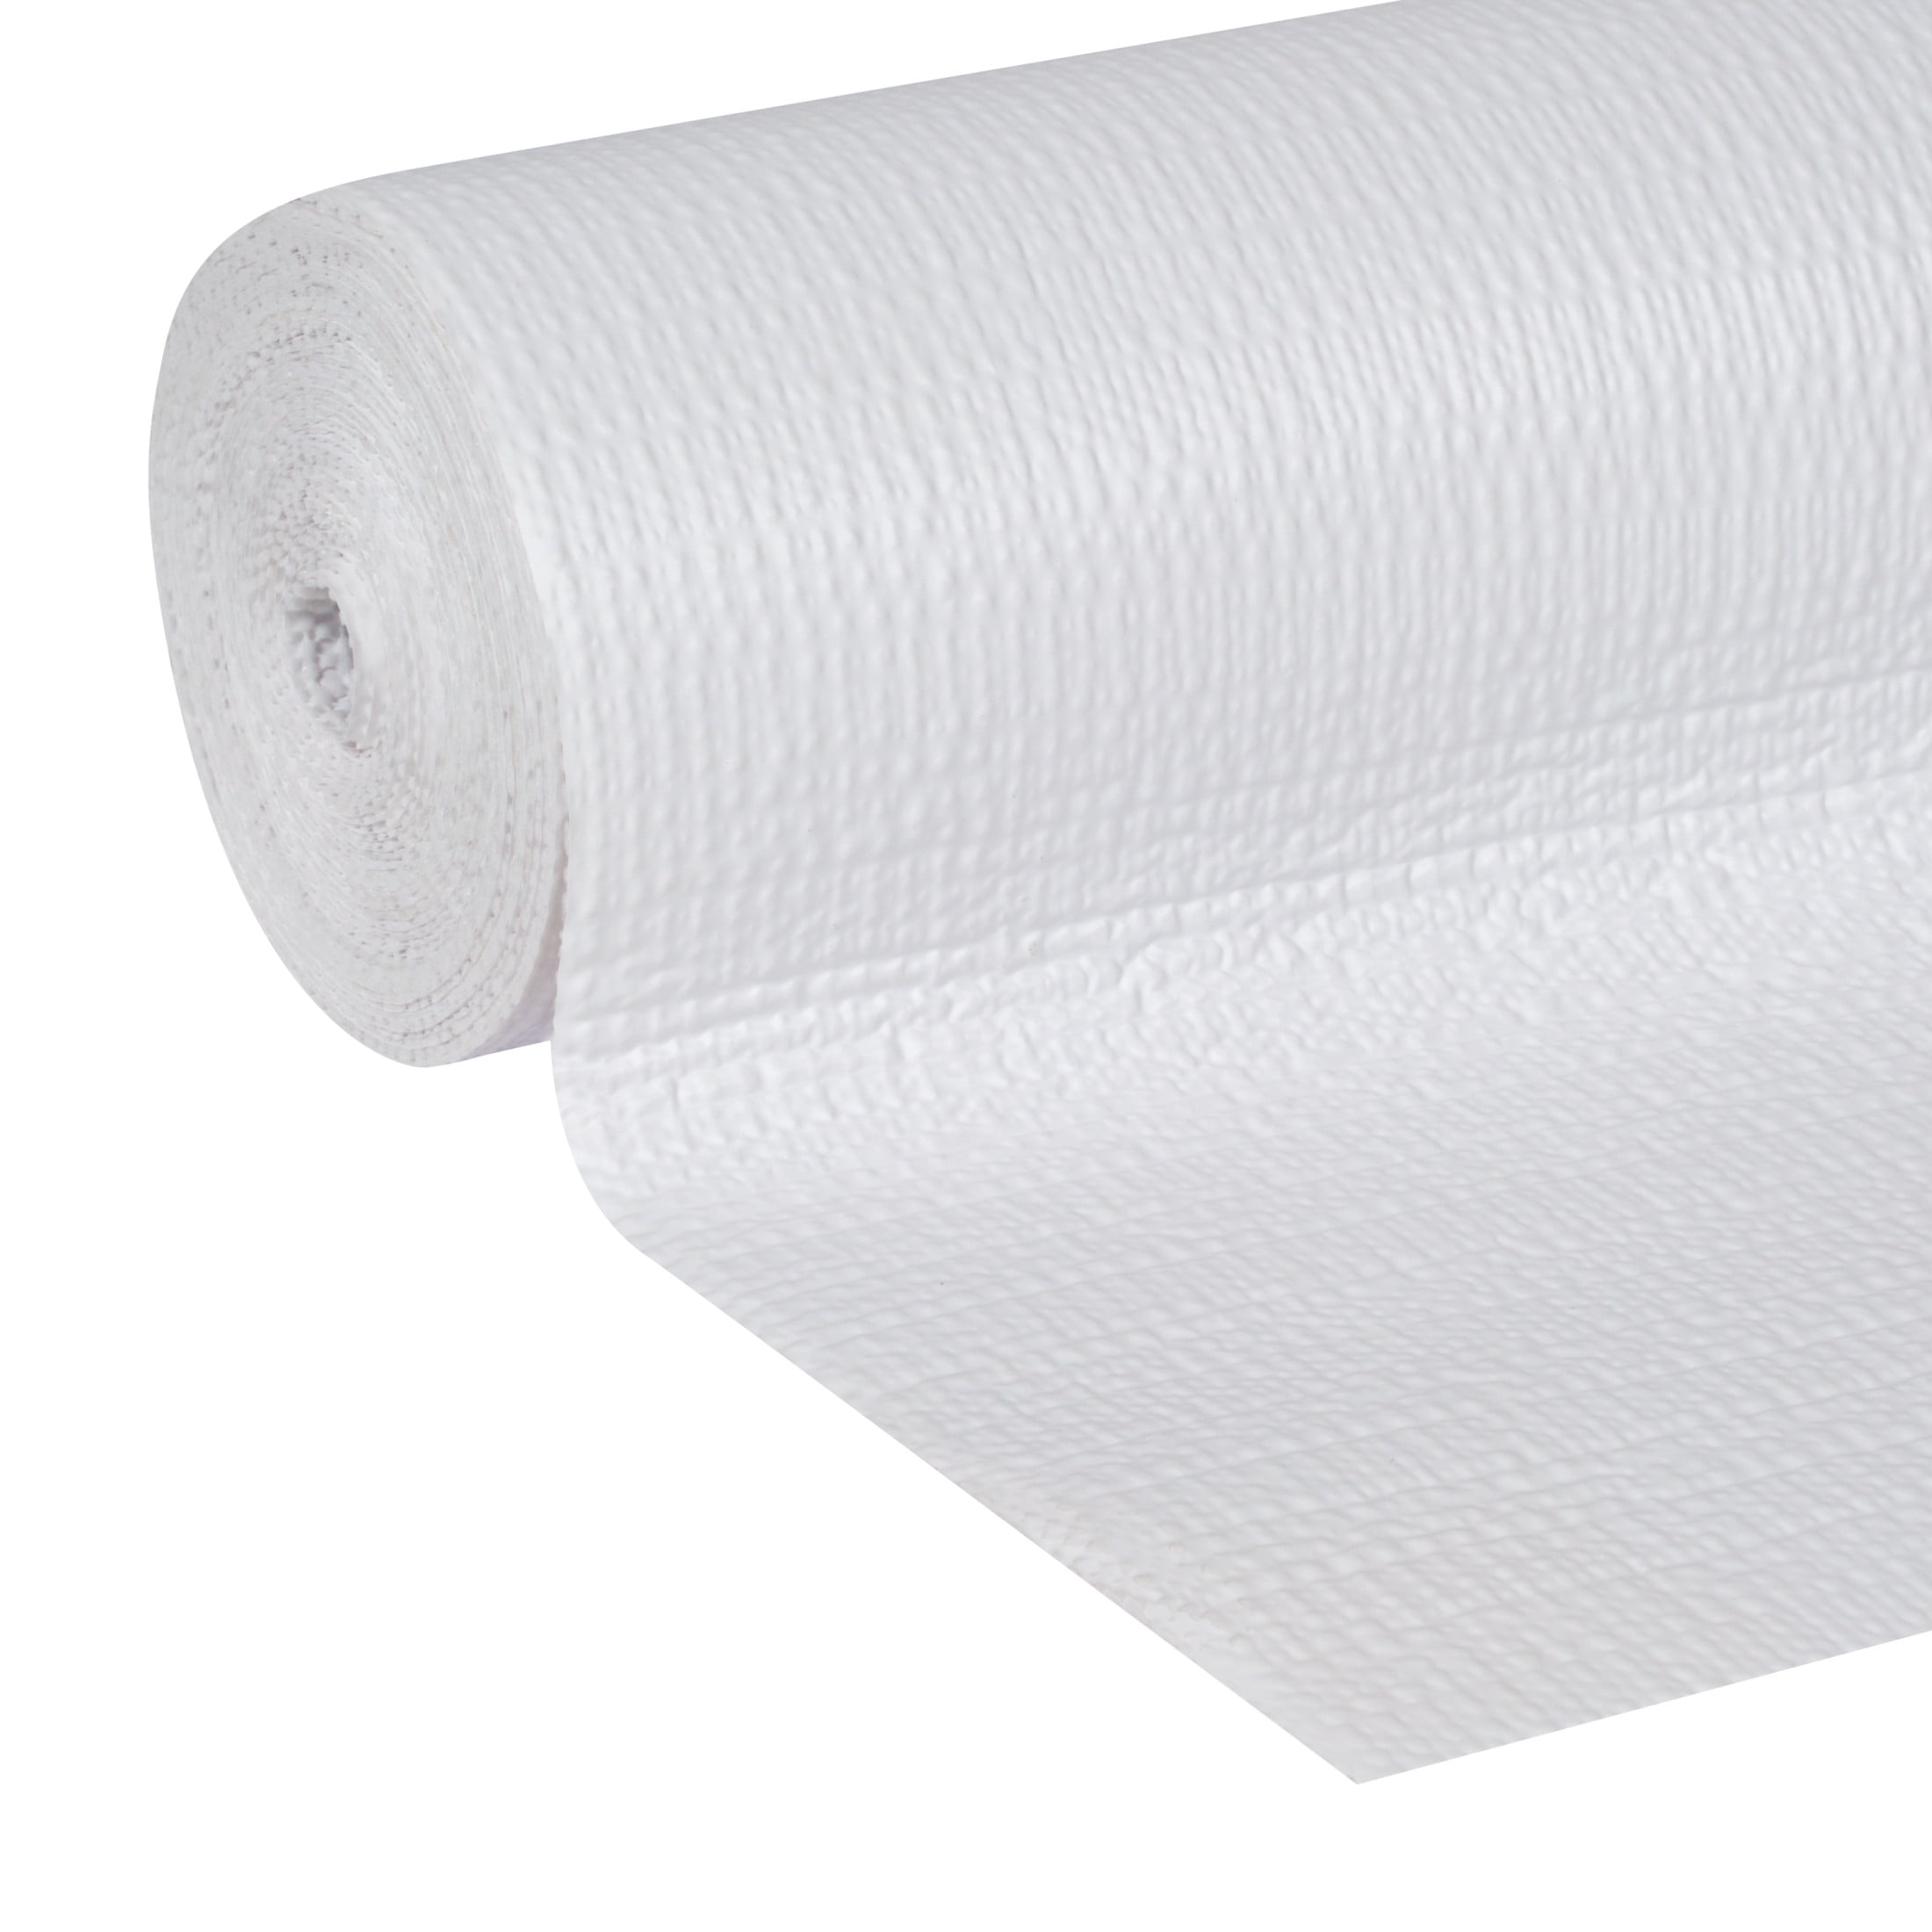 Shelf Liner, Non-Adhesive Grip, White, 12-In. x 5-Ft.